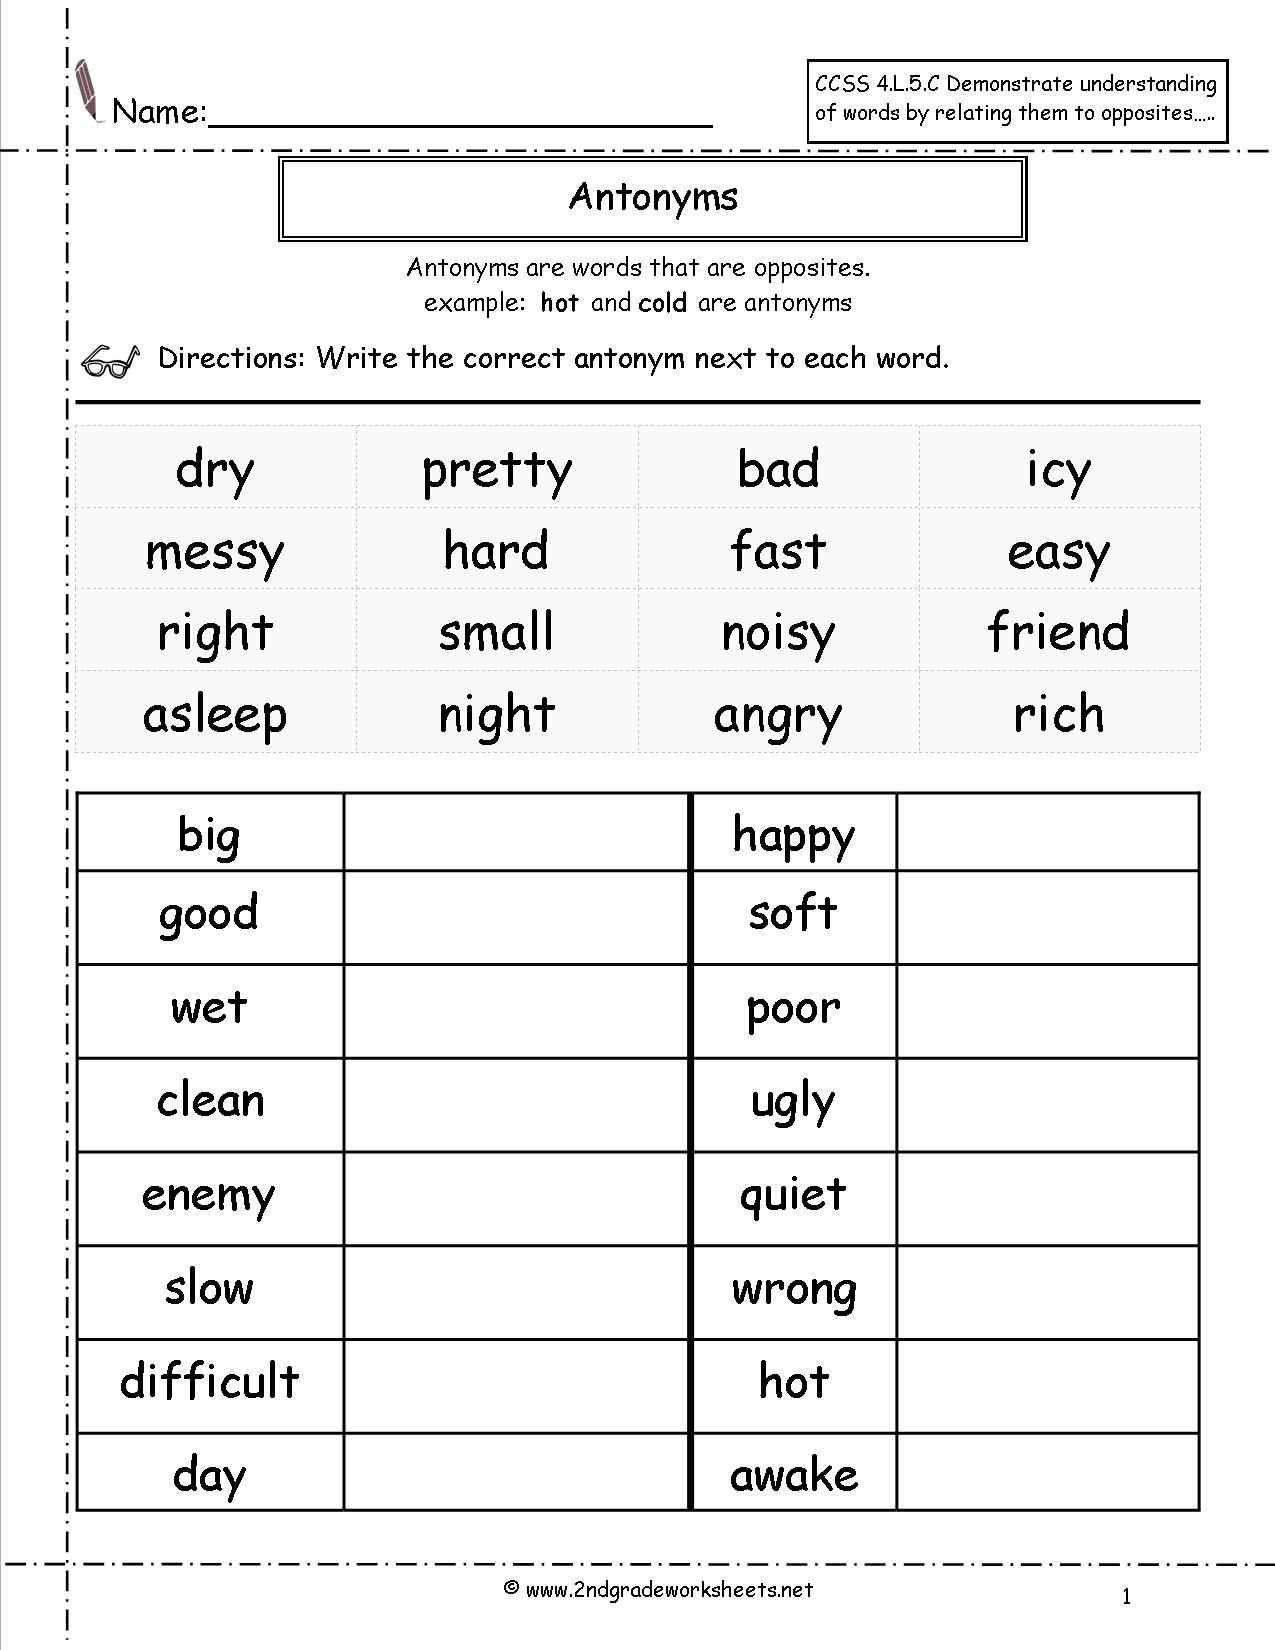 18 Best Images of Worksheets For First Grade Synonyms - Synonym Antonym